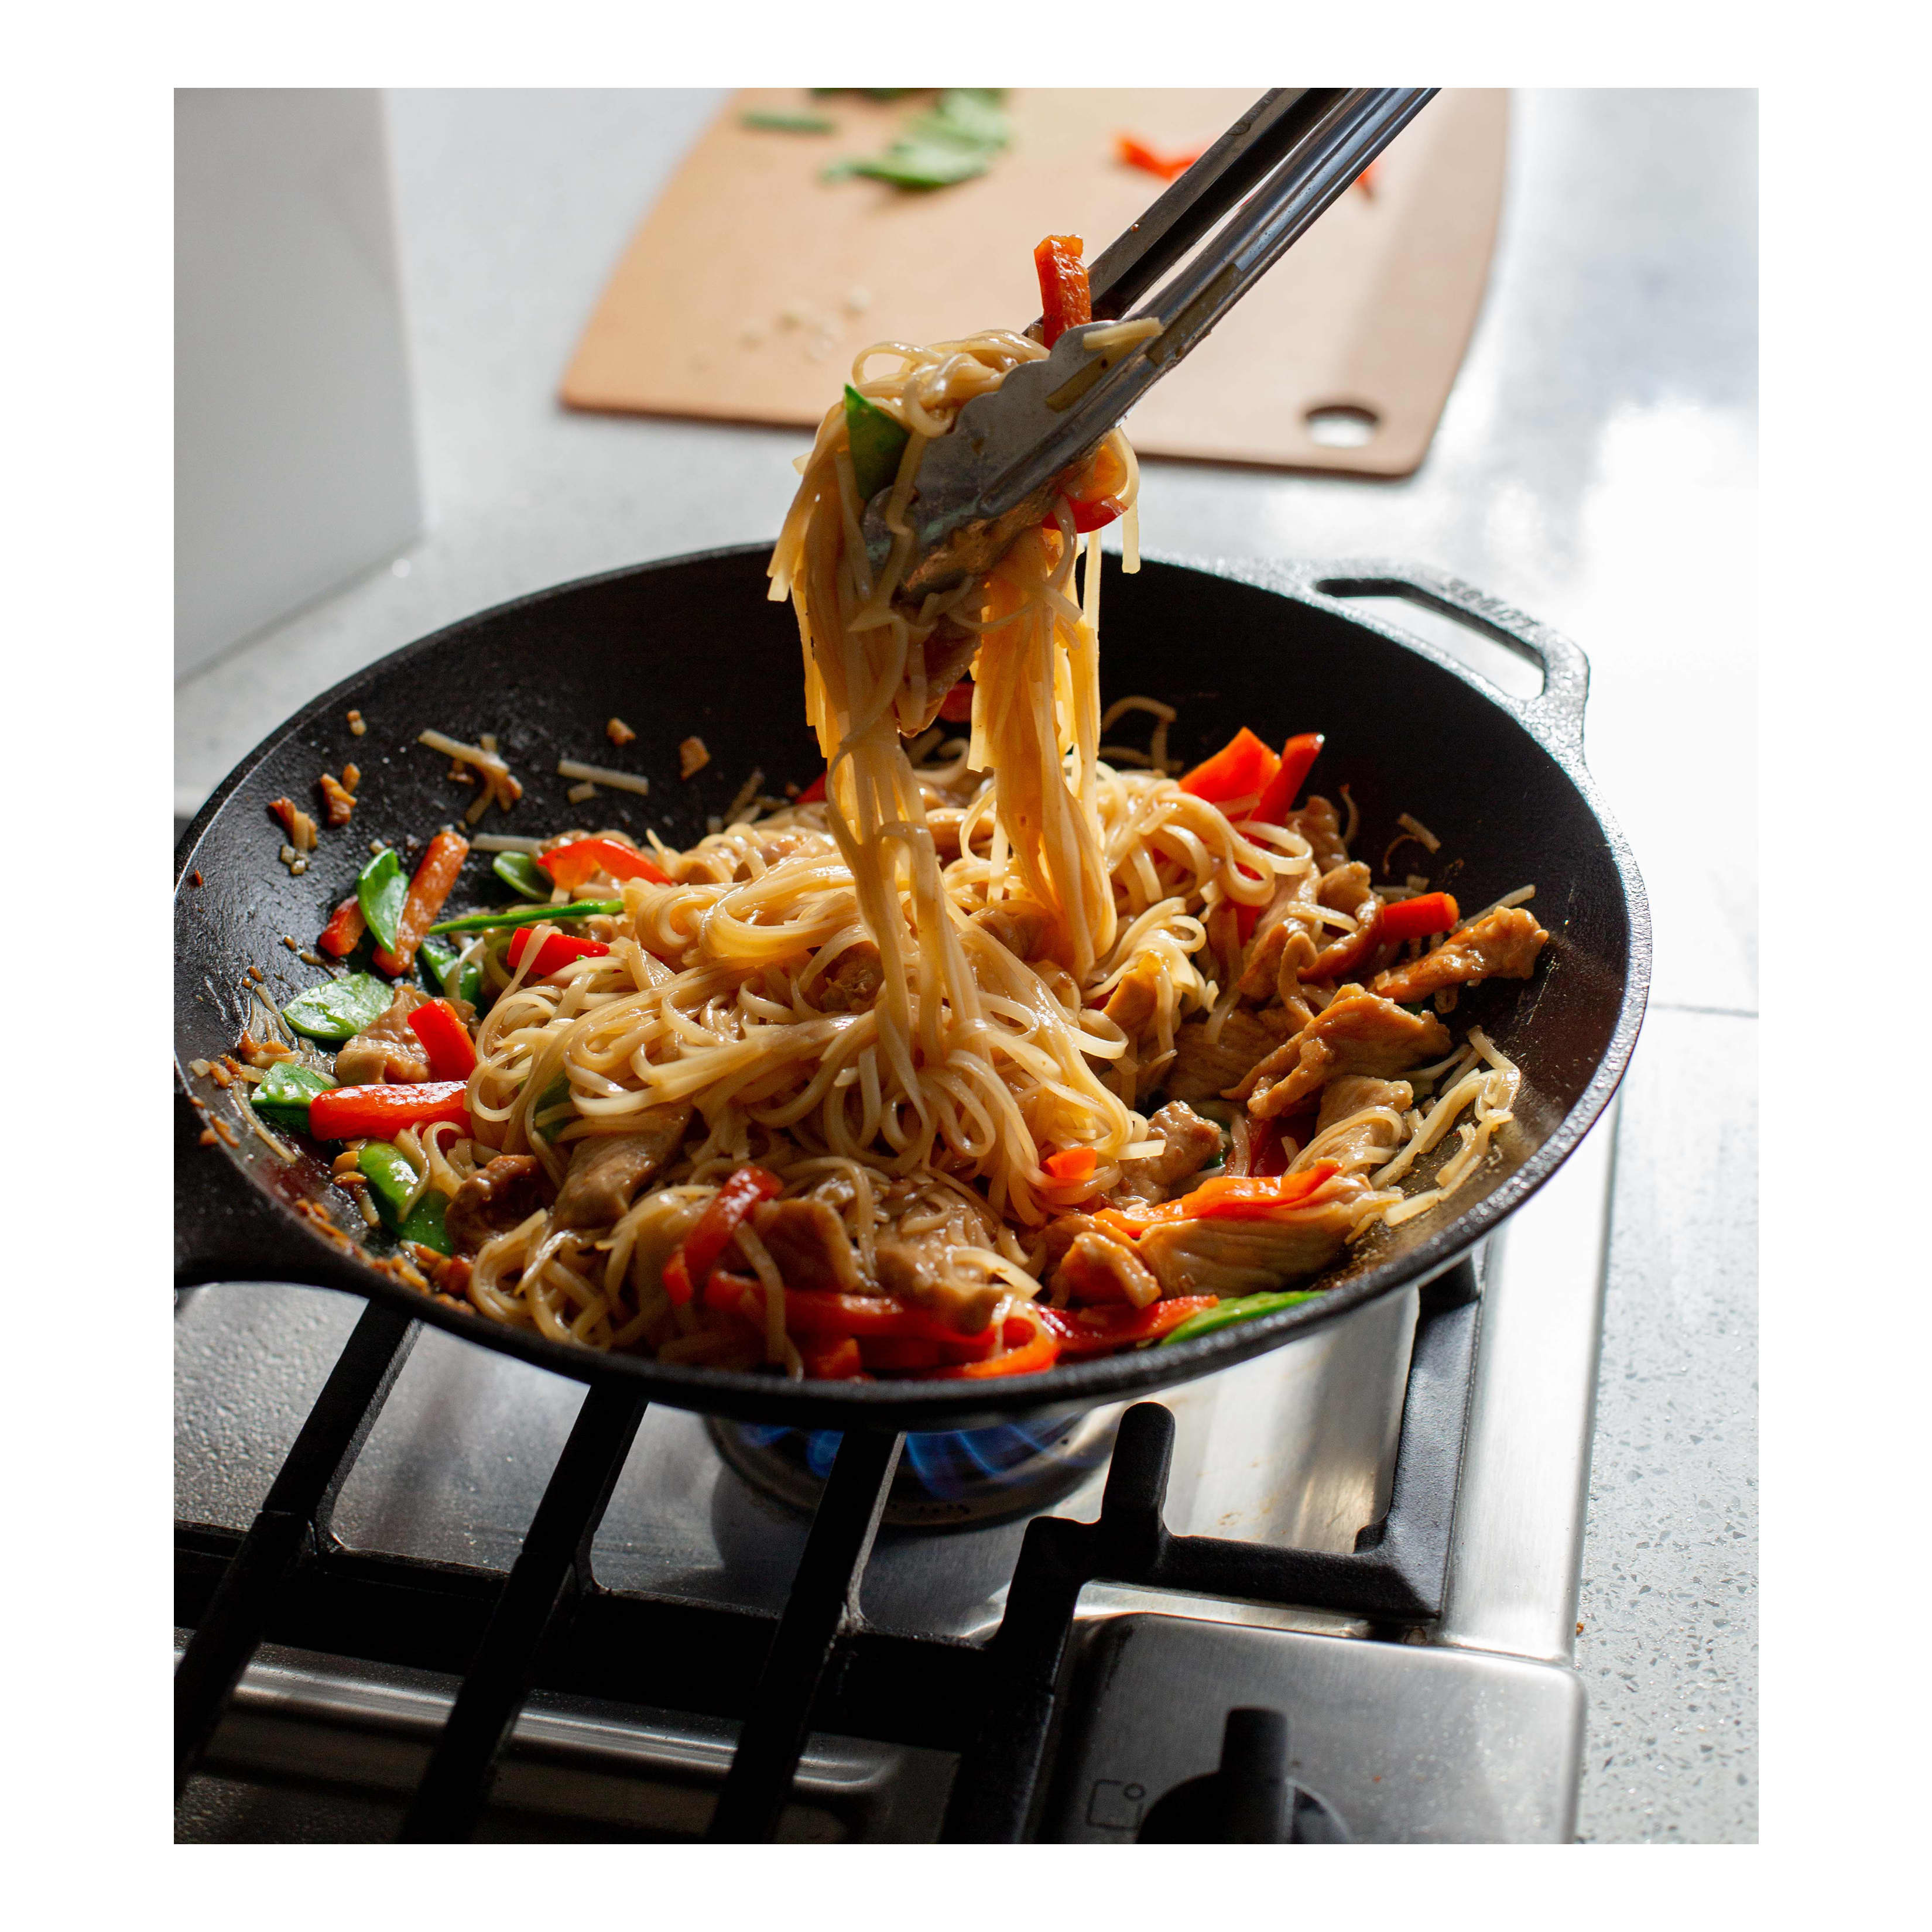 Lodge Chef 12” Stir Fry Pan - in use